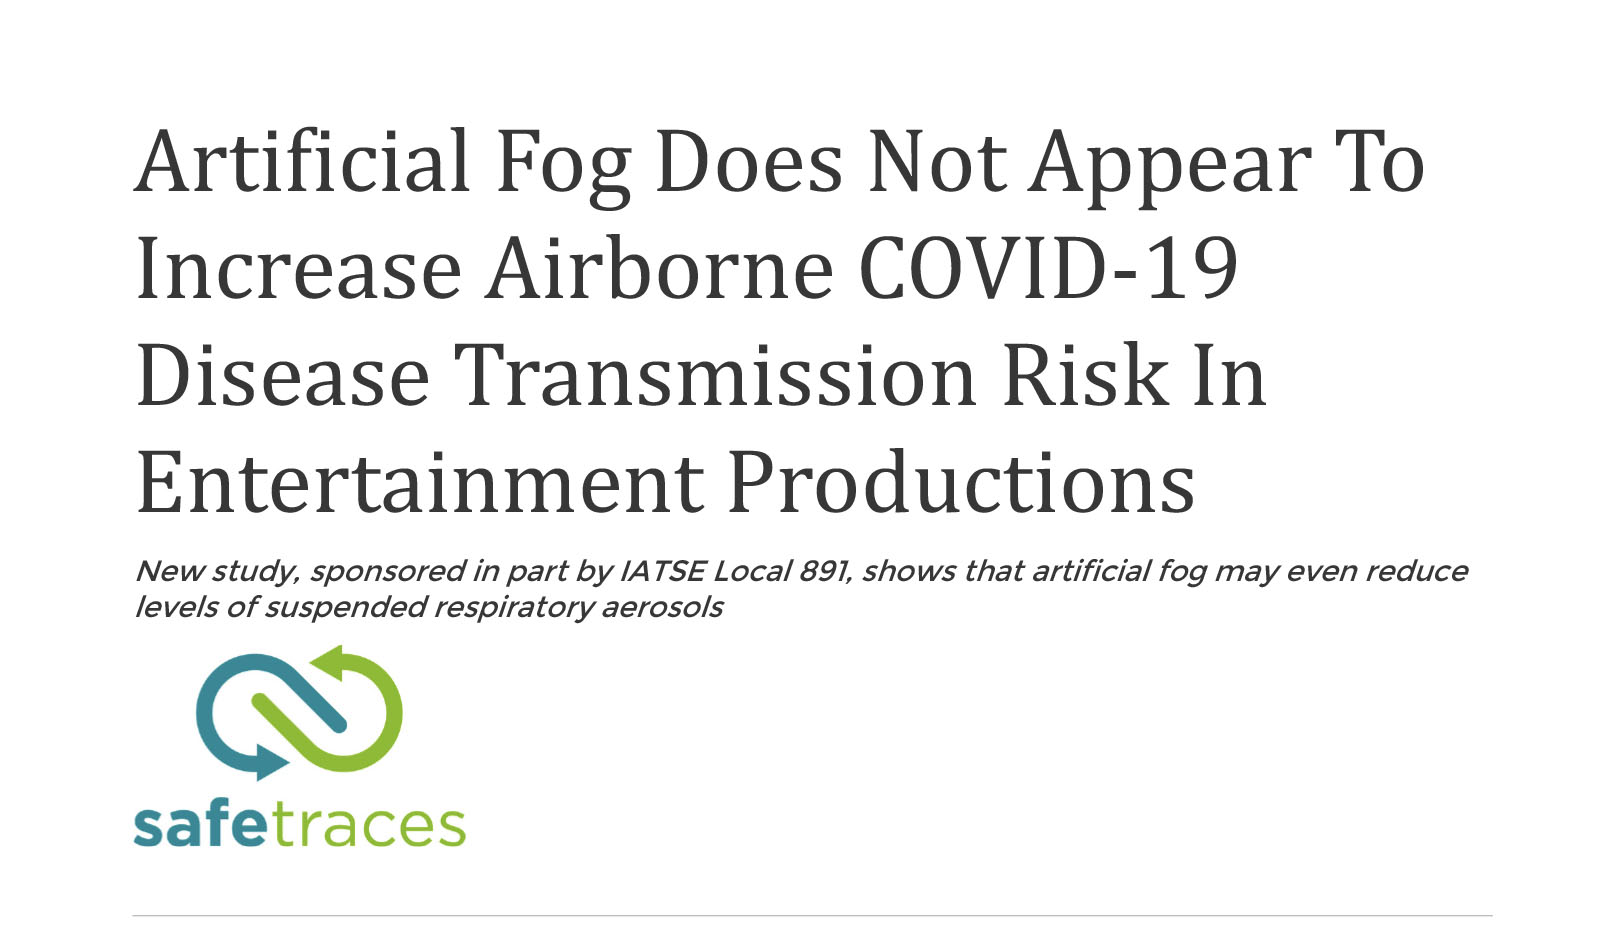 COVID-19 Implications of the Physical Interaction of Artificial Fog on Respiratory Aerosols Report